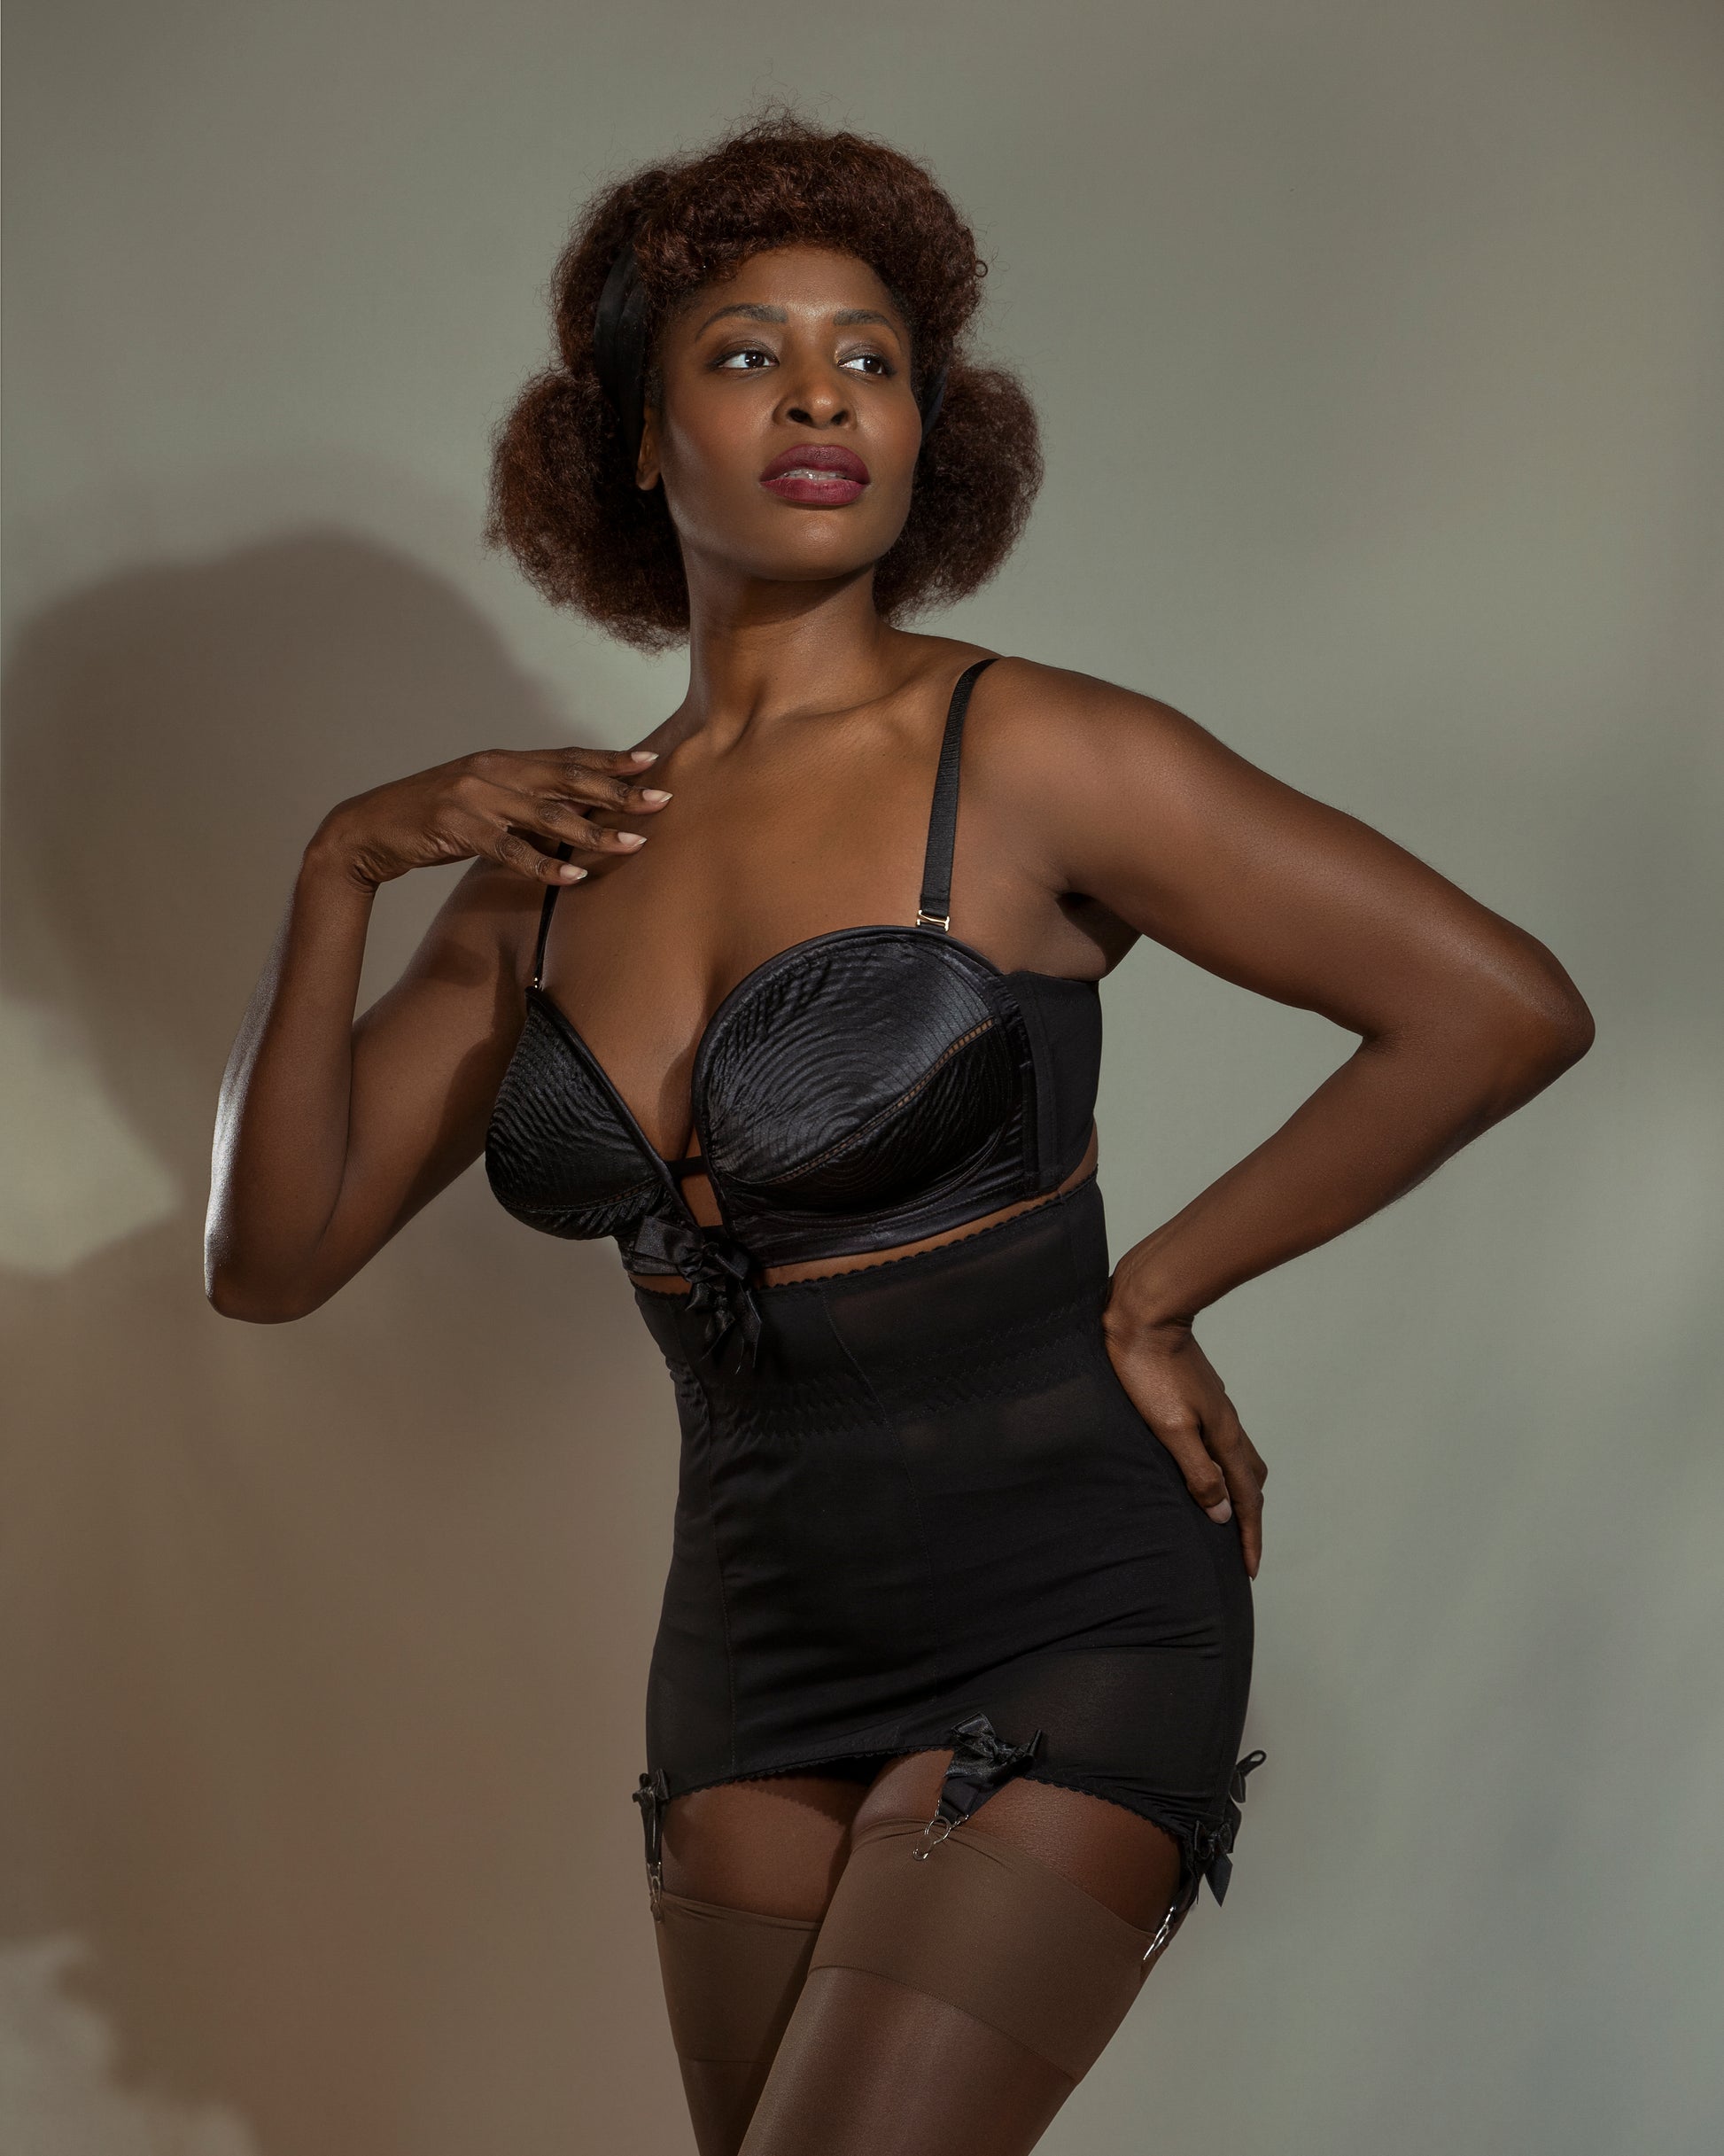 Pin by Kerryanne Friday on Girdles and shapewear for me!